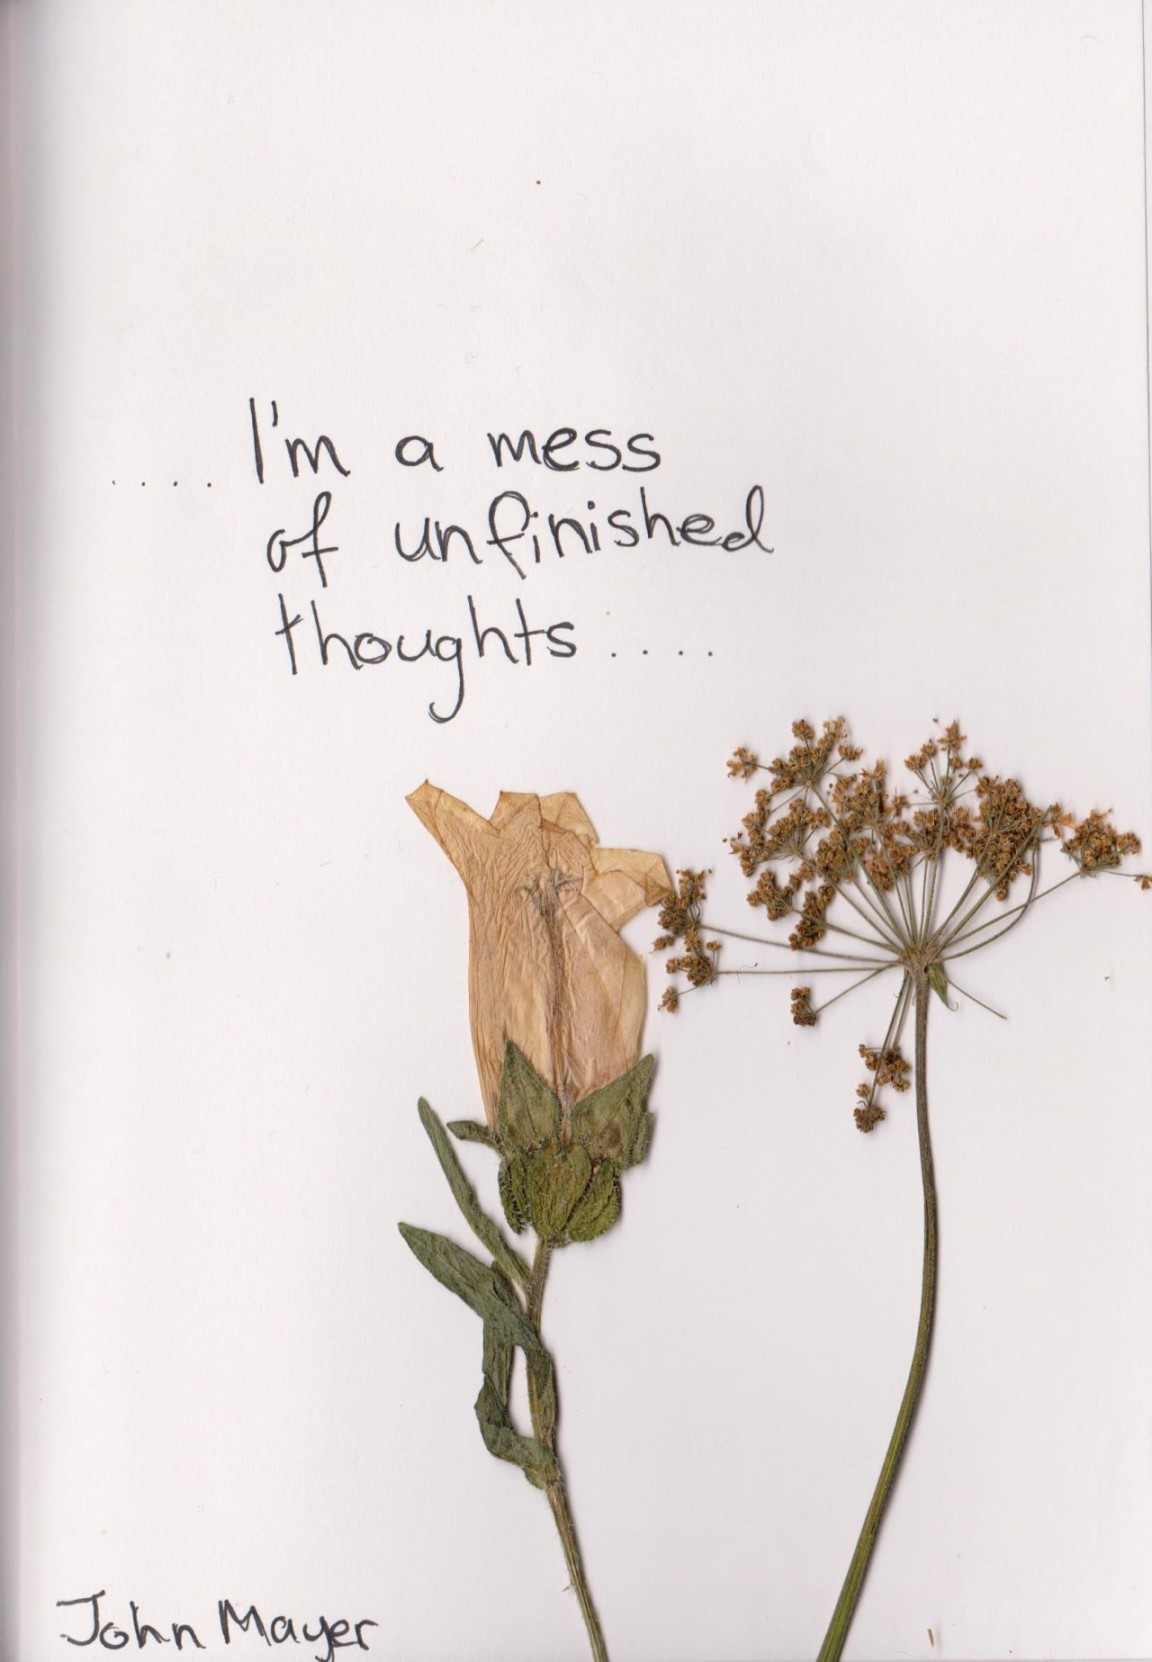 From my rotting body, flowers shall grow —